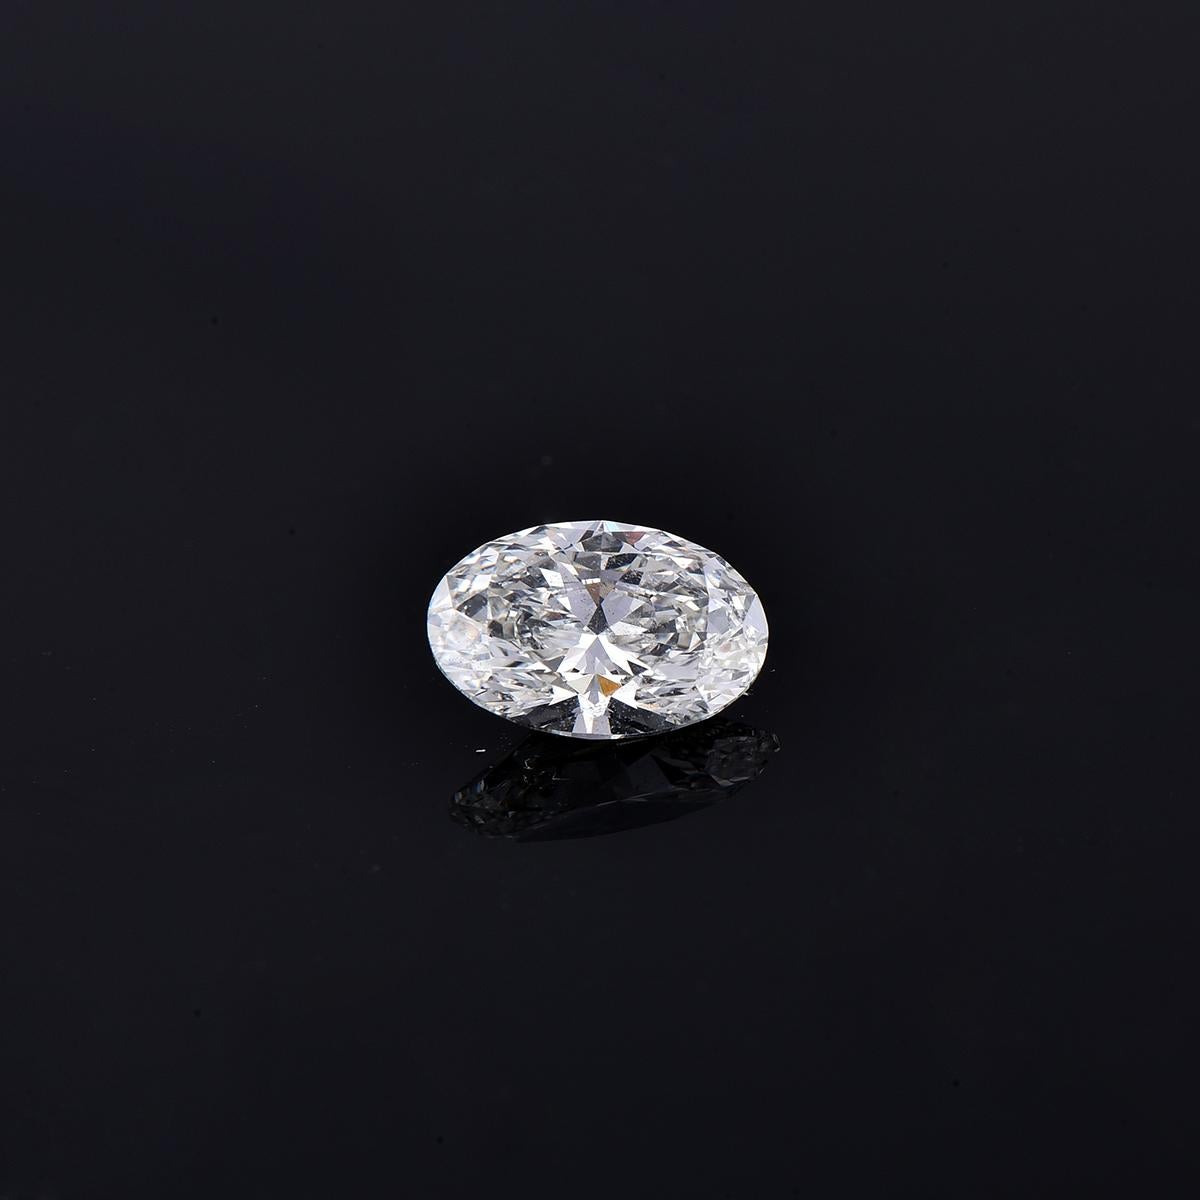 Weight: 1.02ct
Cut: Oval Brilliant
Color: K
Clarity: IF                                                               
Polish: EX
Symm: Very Good                                                                                                        